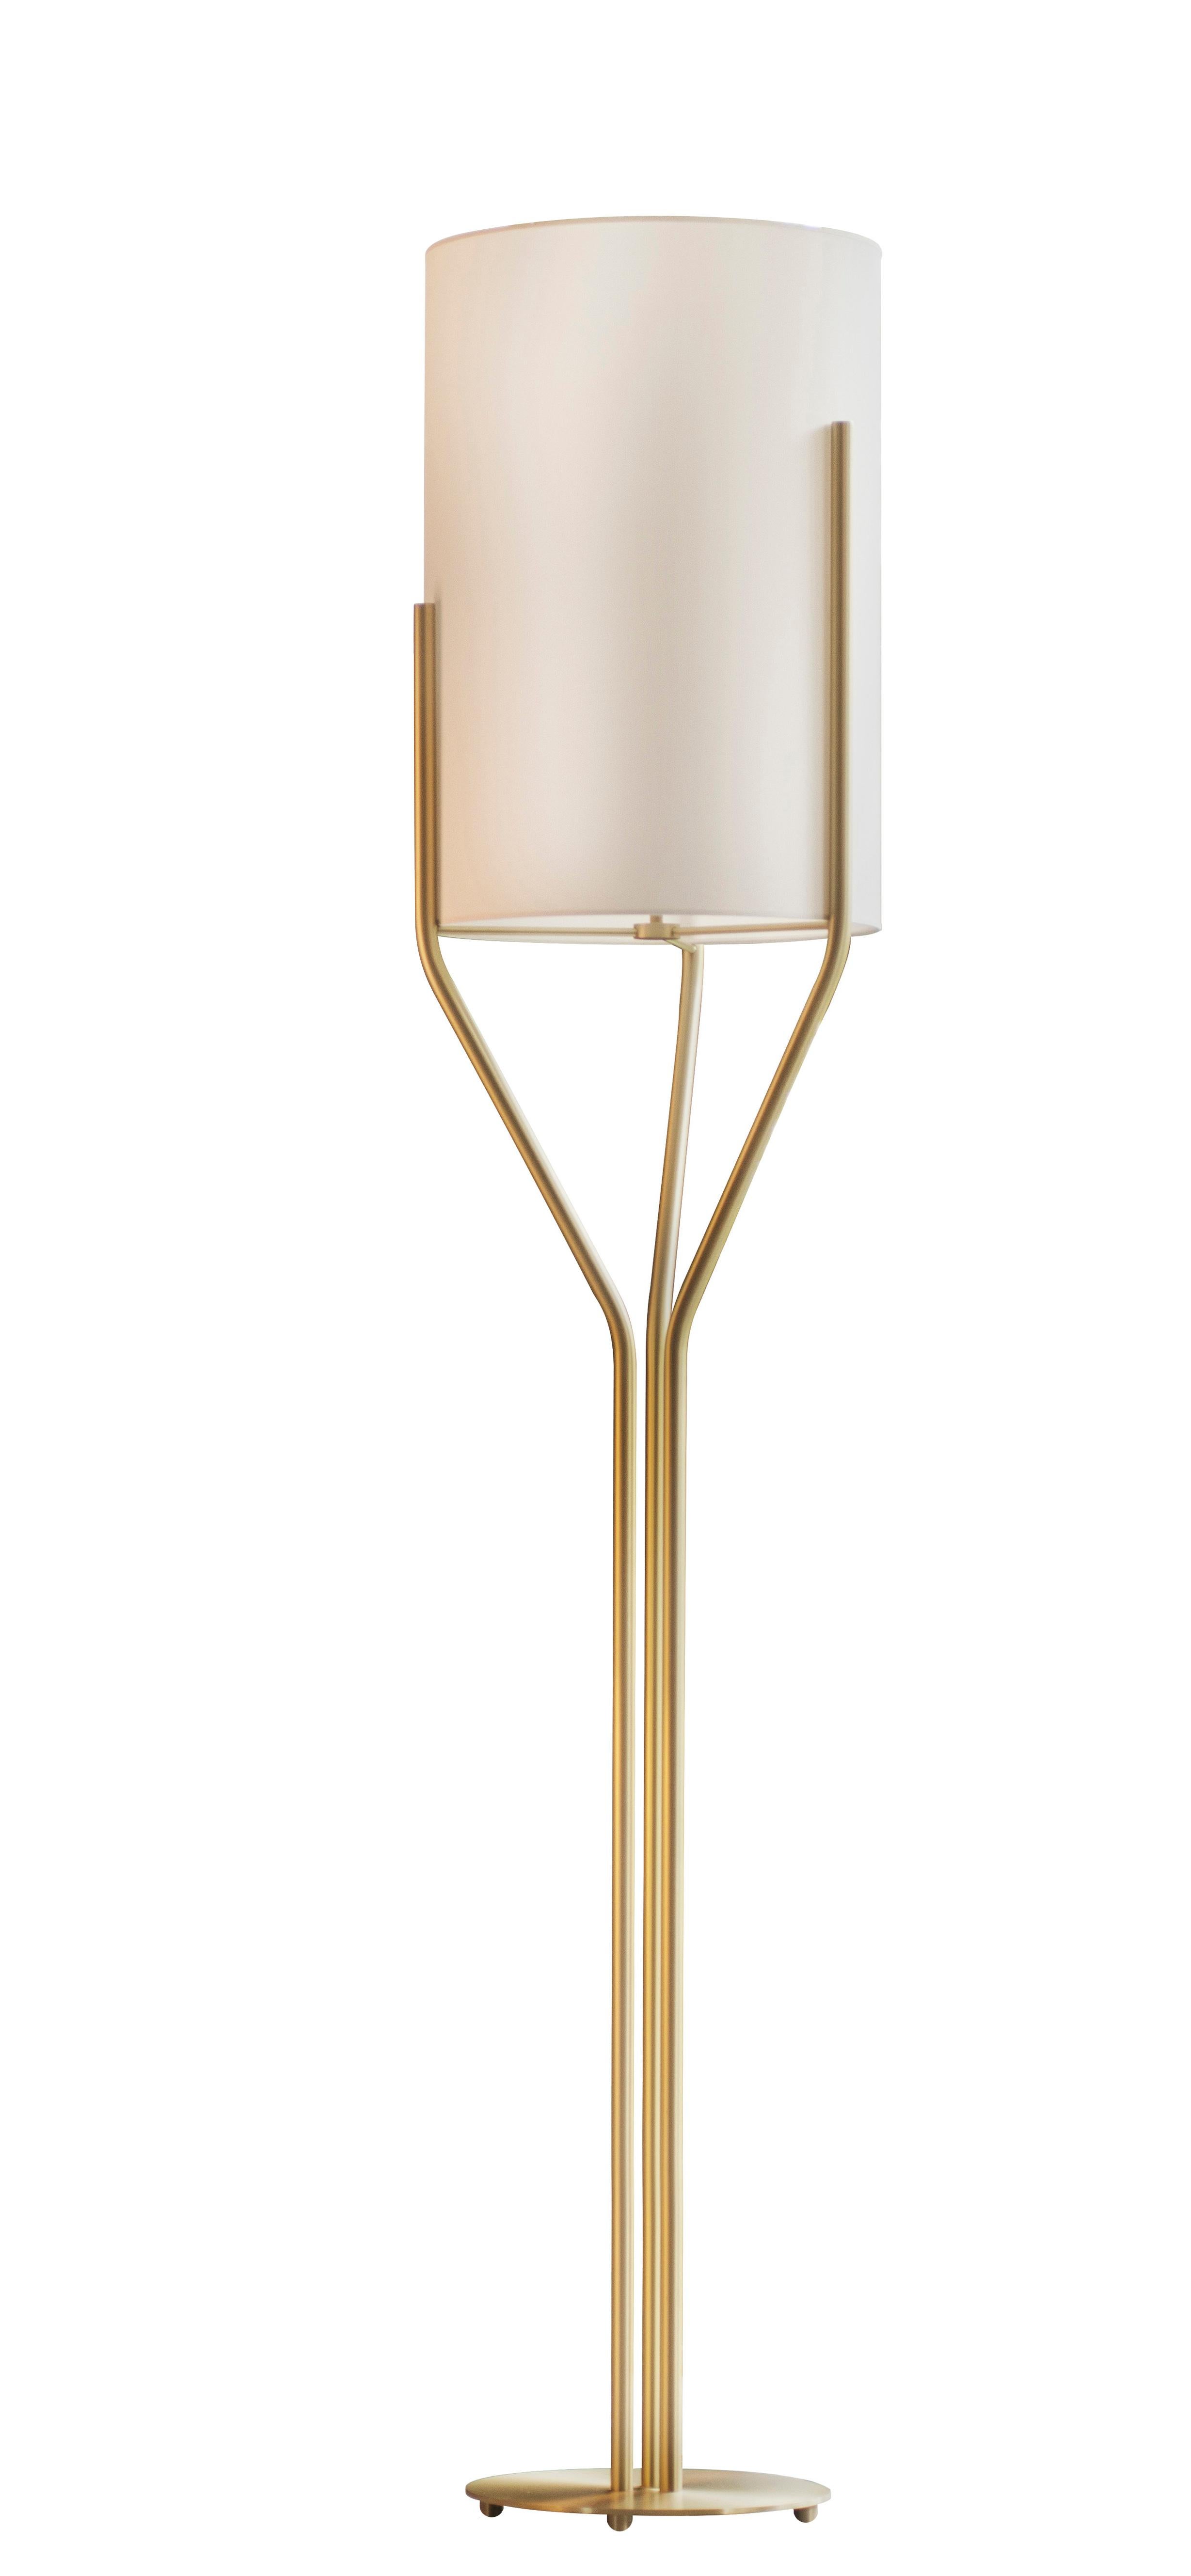 Arborescence XXL satin brass floor lamp by Hervé Langlais
Dimensions: D40 X H210 cm
Materials: solid brass, lampshade drop paper® M1, black textile cable (2m).
Others finishes and dimensions are available. 

All our lamps can be wired according